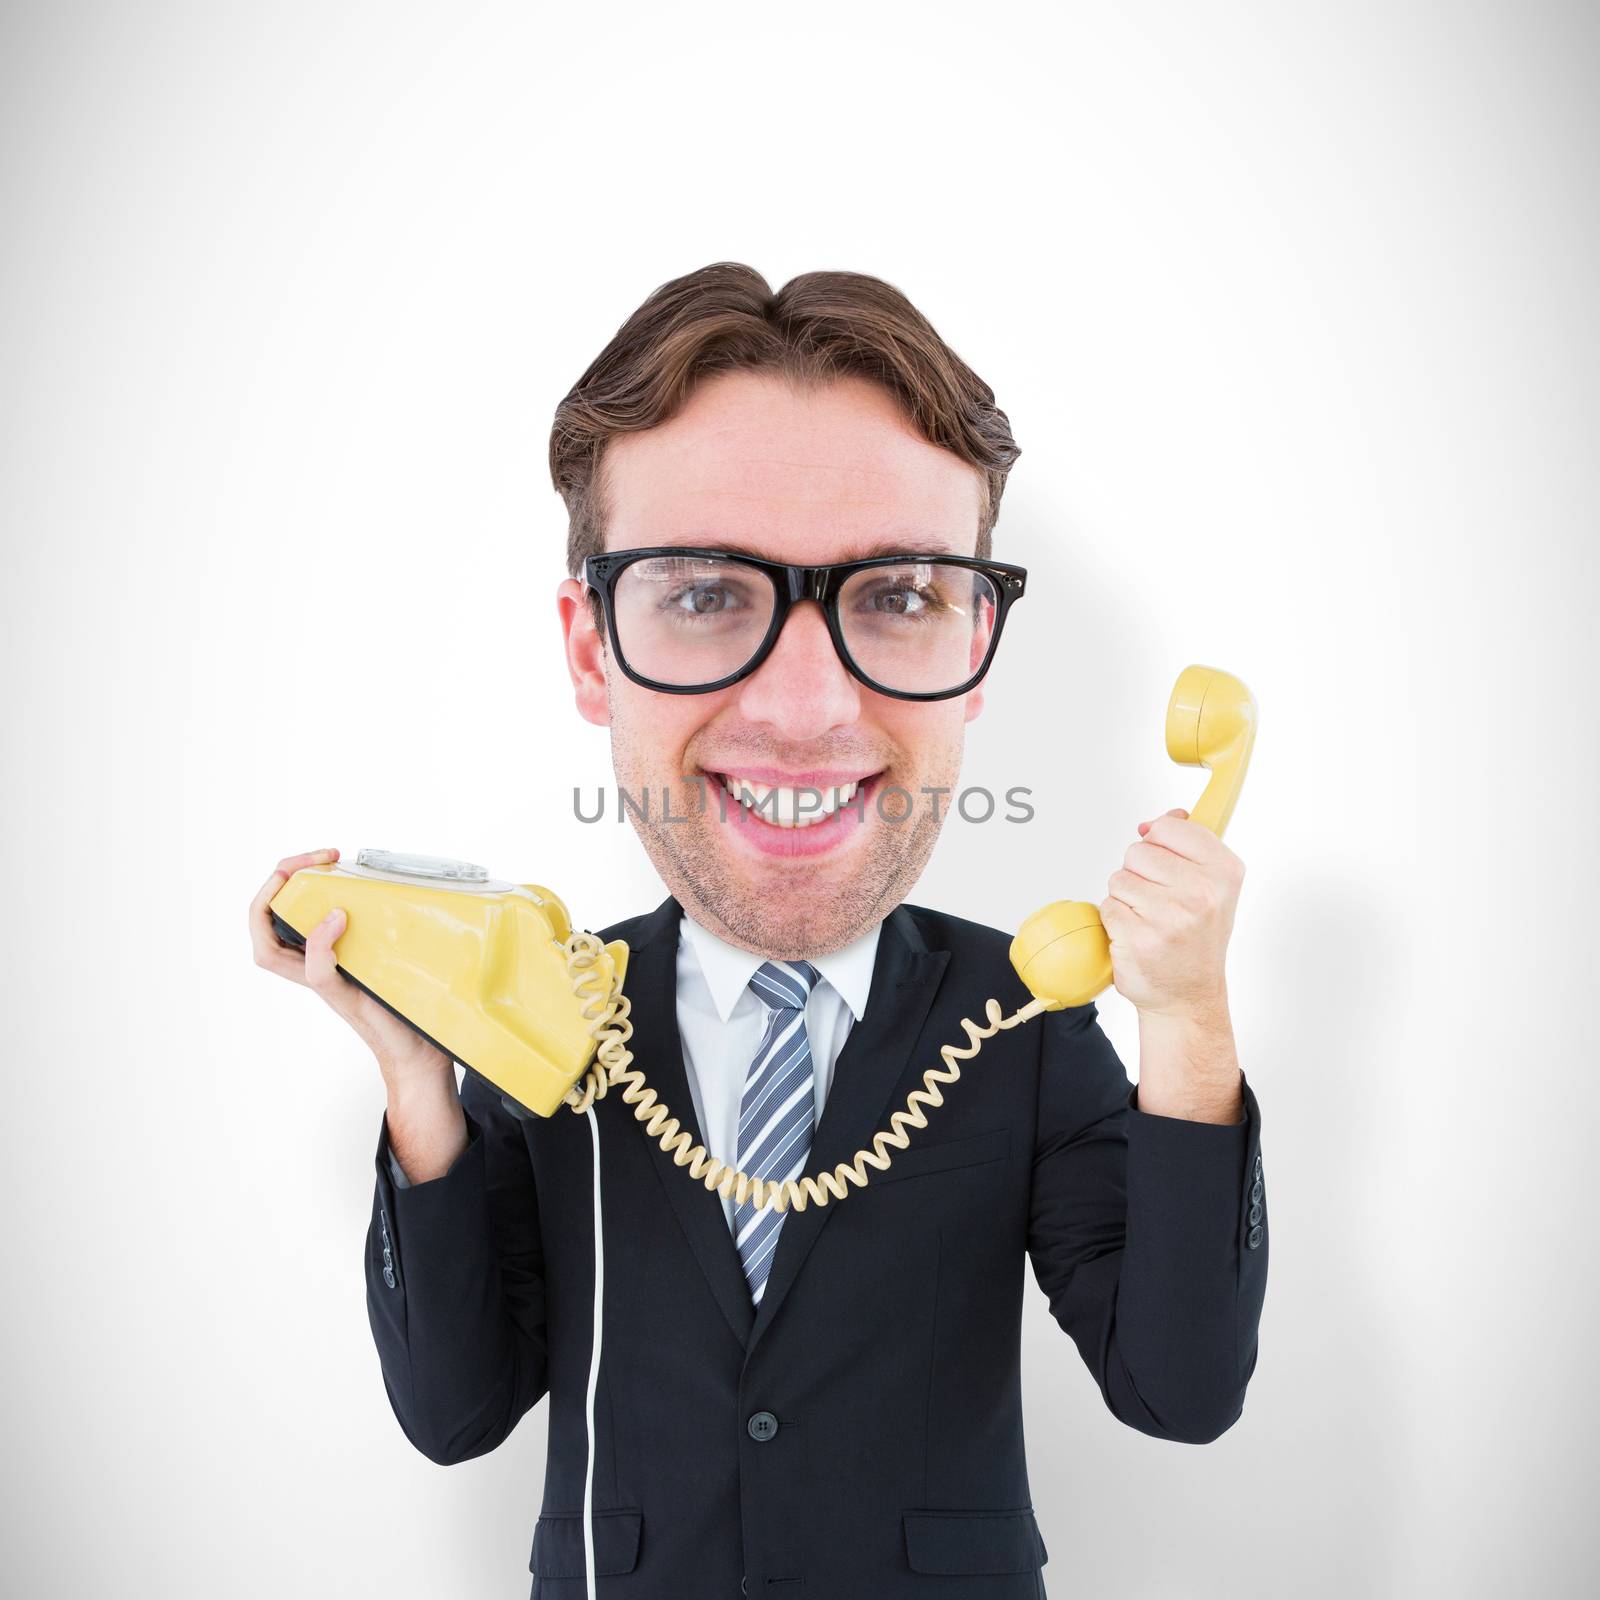 Geeky businessman holding phone against white background with vignette